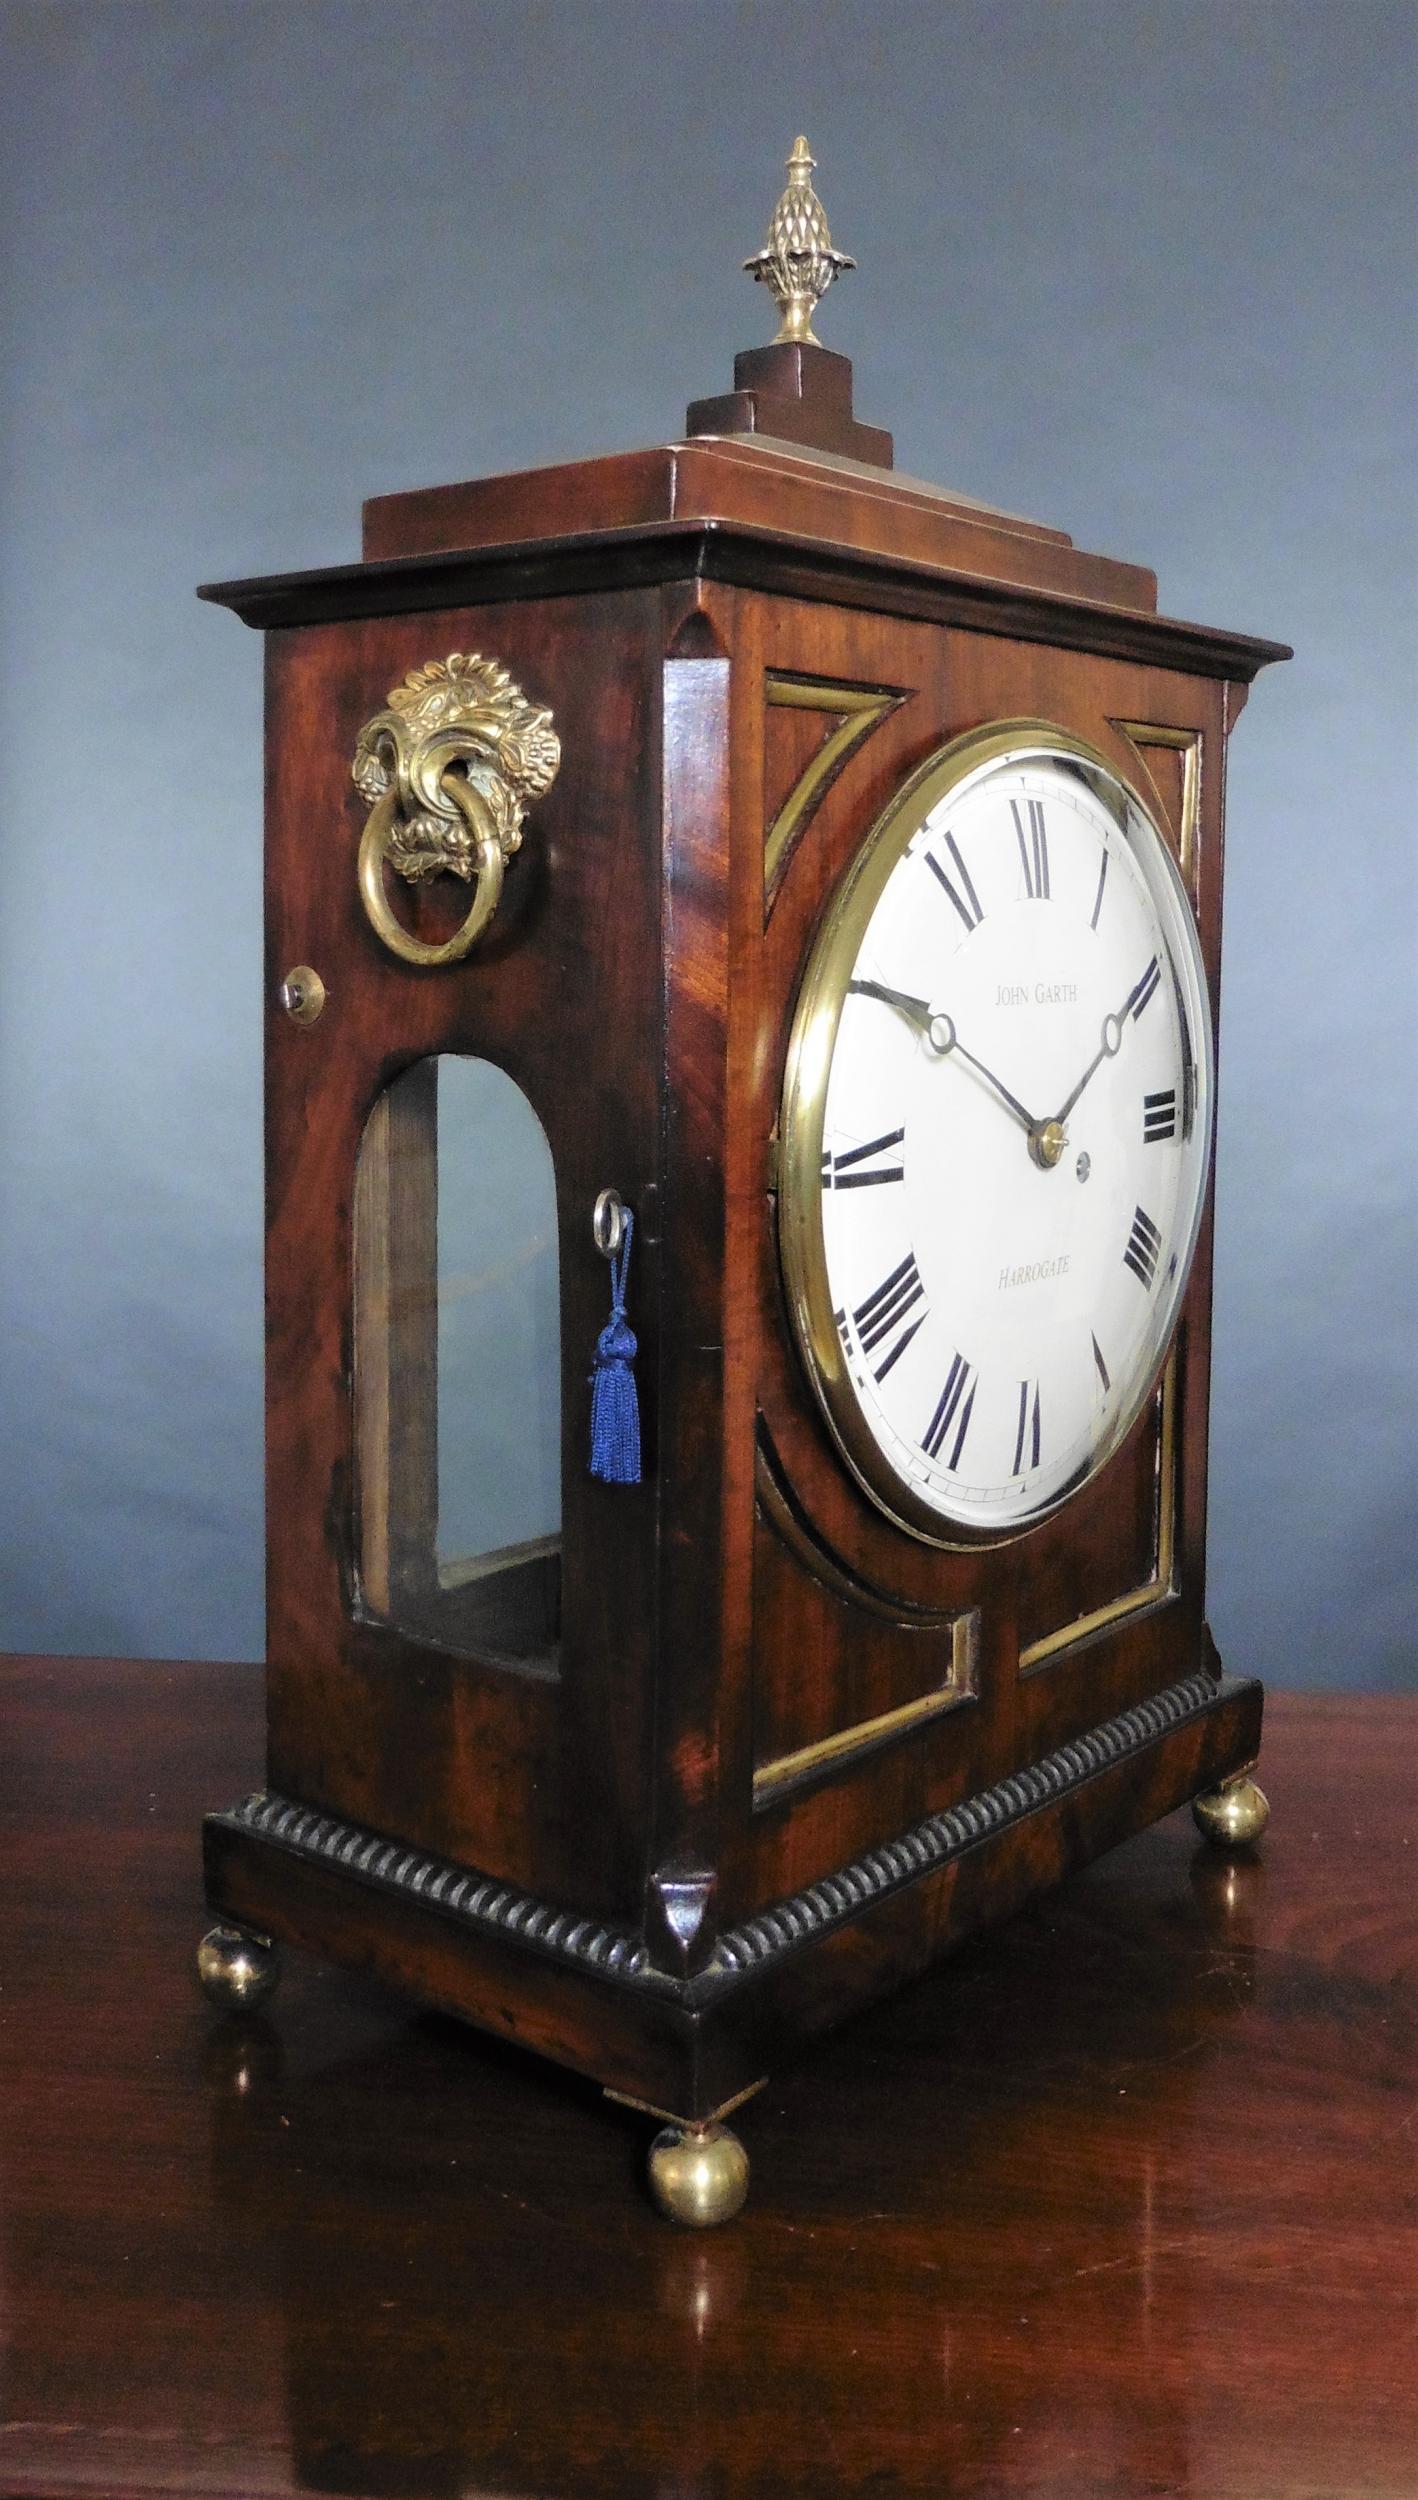 Regency bracket clock by
John Garth, Harrogate

Mahogany case standing on a stepped base with ribbed decoration and standing on four brass ball feet, chamfered top surmounted by a brass pineapple finial.

Cast brass bezel with bevelled glass